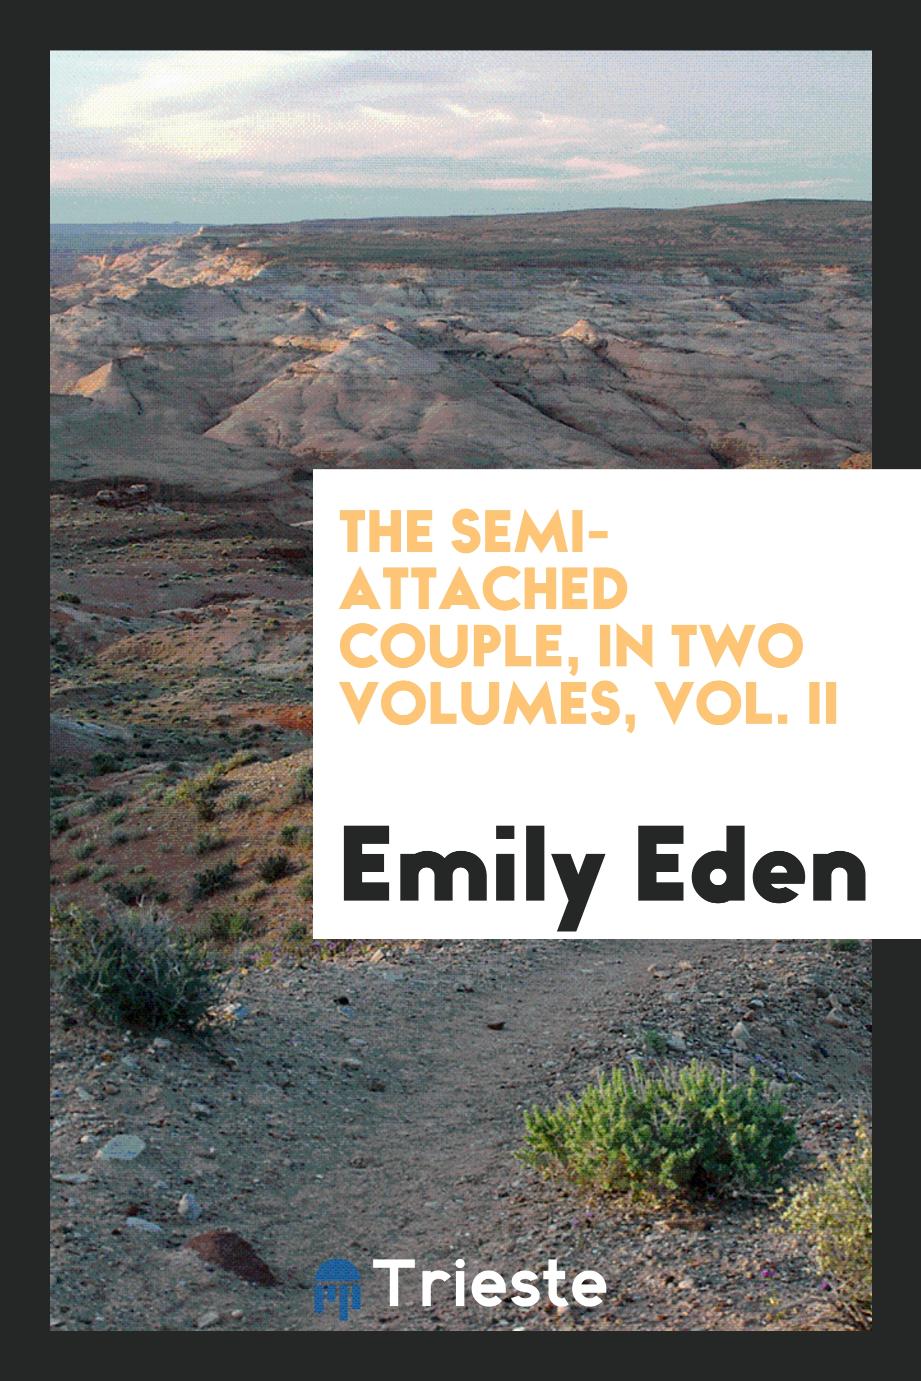 The semi-attached couple, in two volumes, vol. II